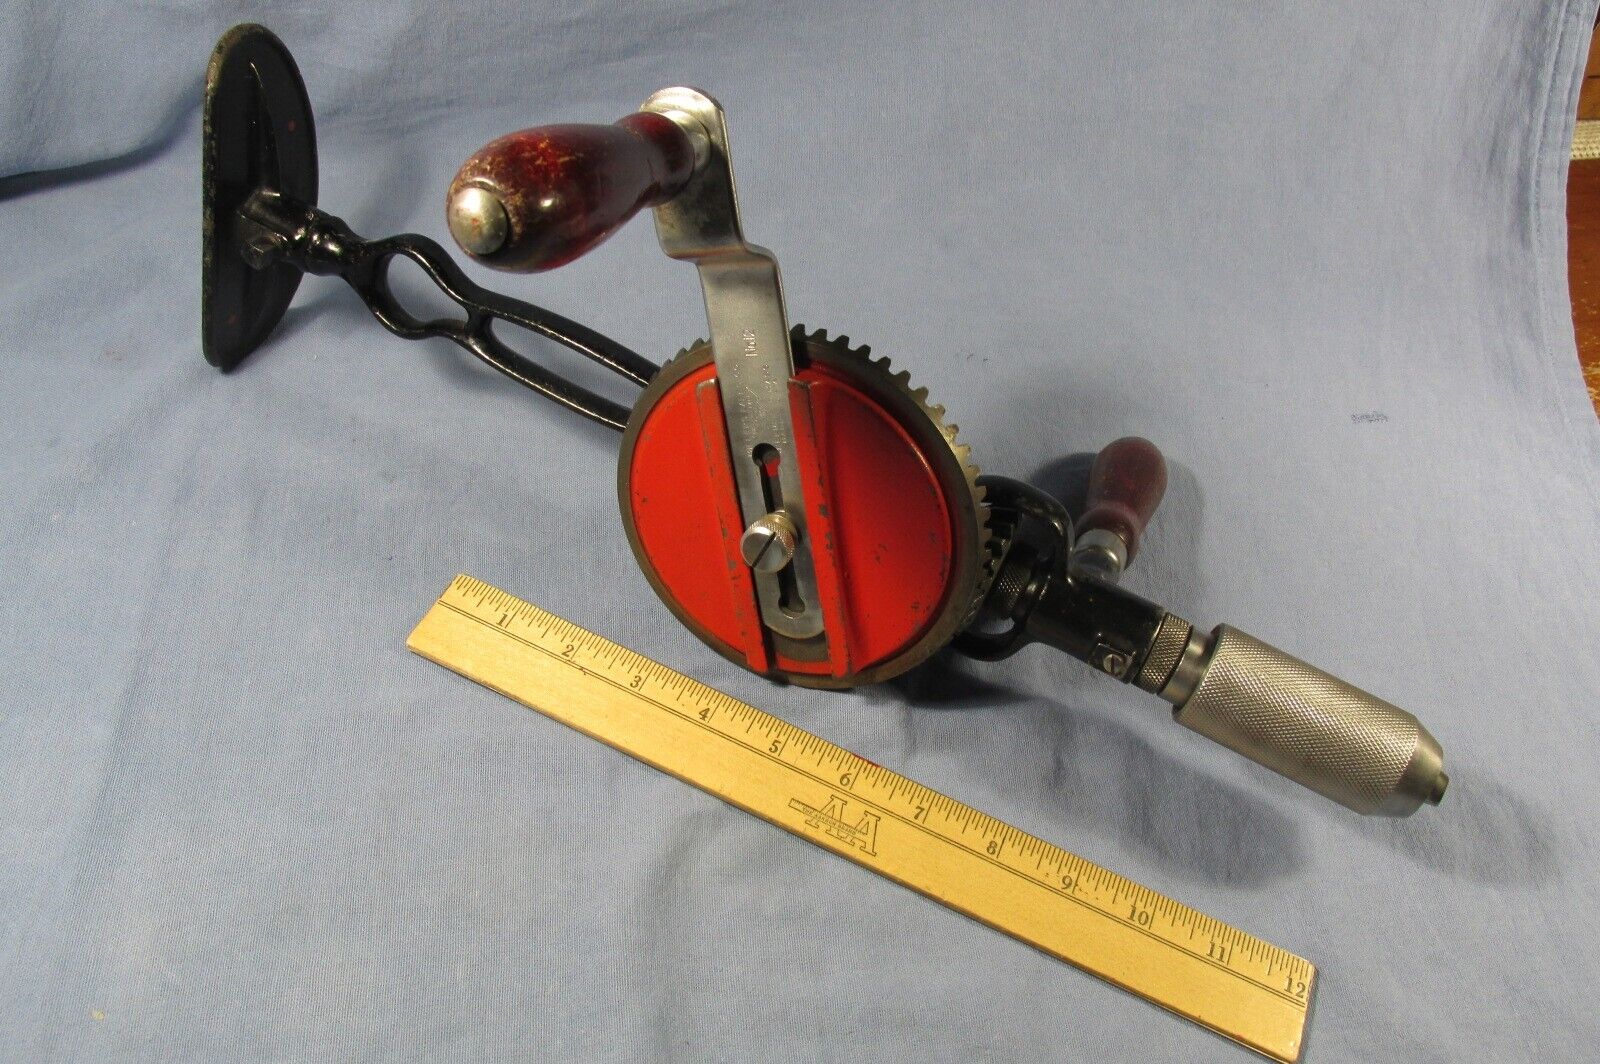 Good OLD MILLERS FALLS No. 12 BREAST DRILL 2 Speed with Level & Wood Handles